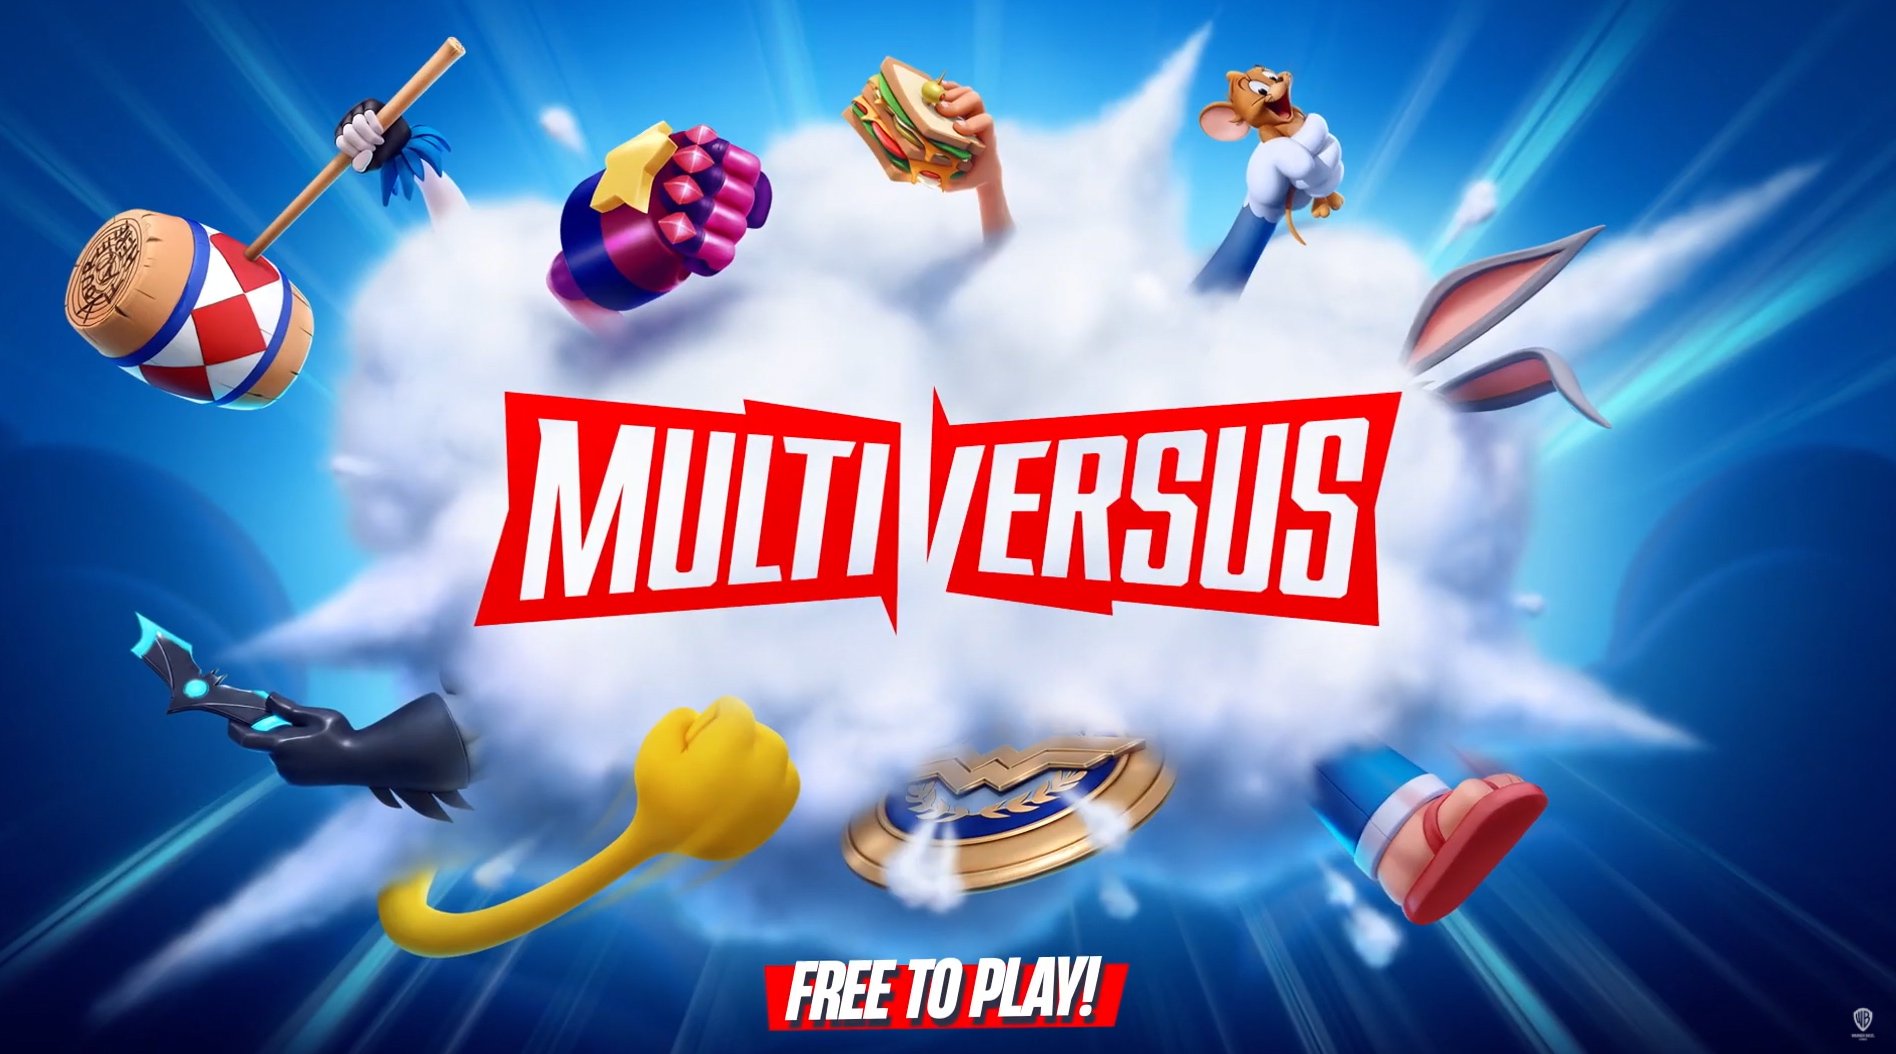 It's the final day to play MultiVersus before the online beta gets